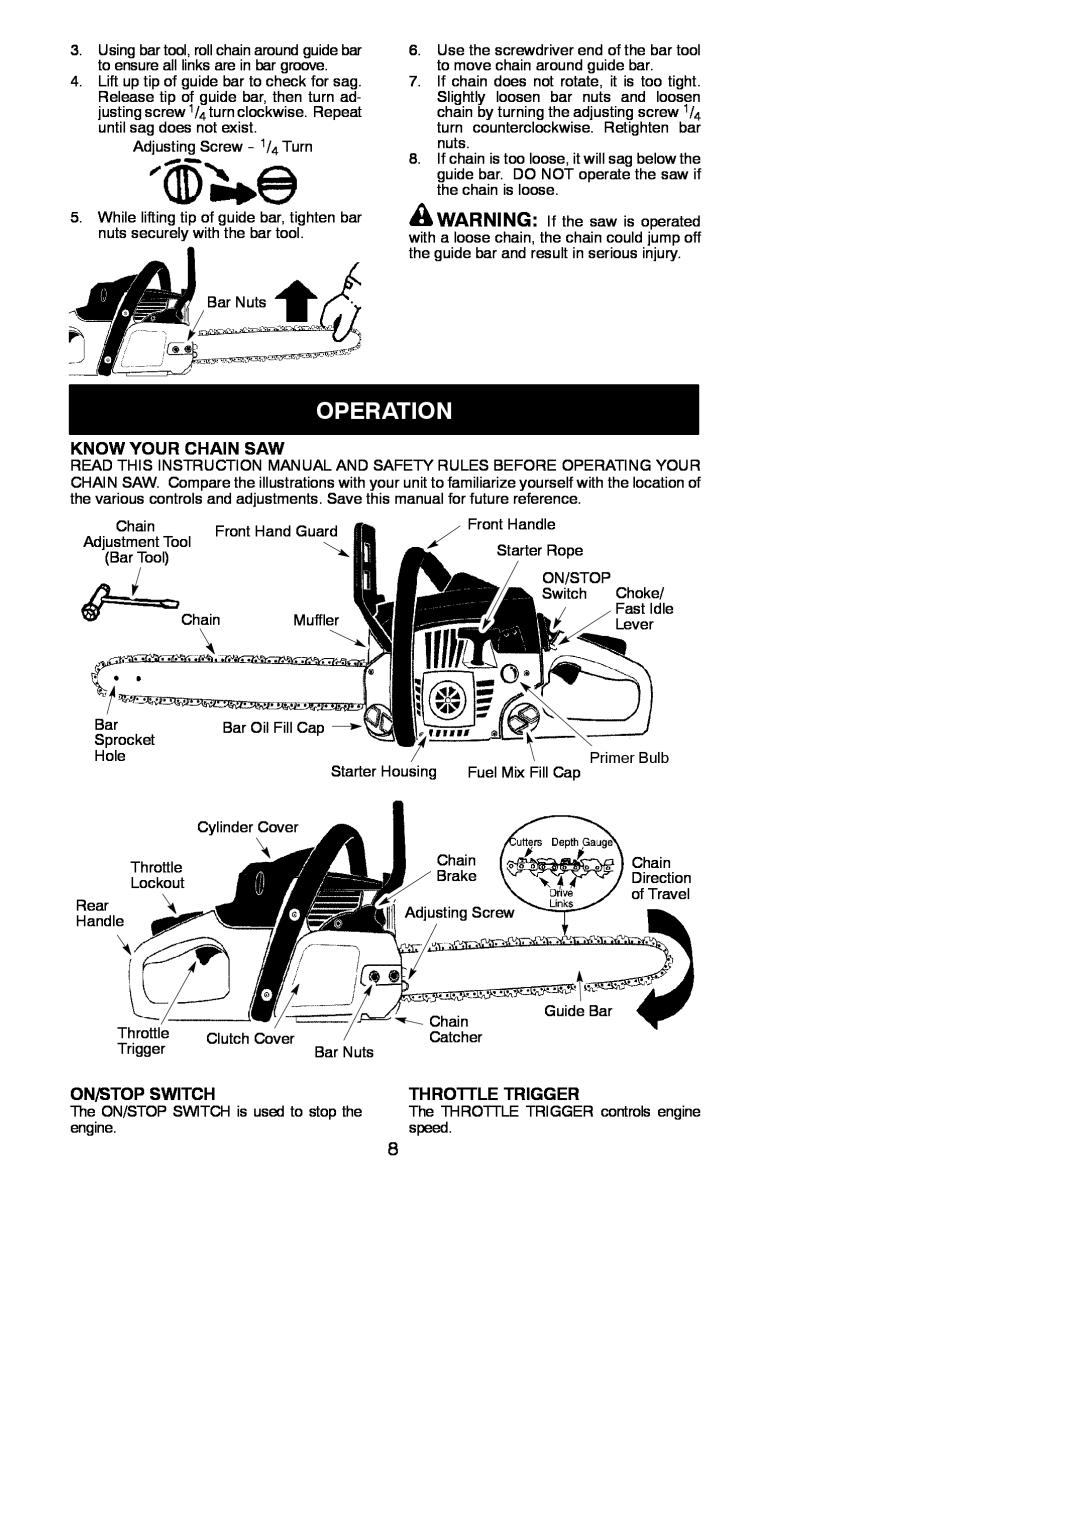 Poulan 530165399 instruction manual Operation, Know Your Chain Saw, On/Stop Switch, Throttle Trigger 